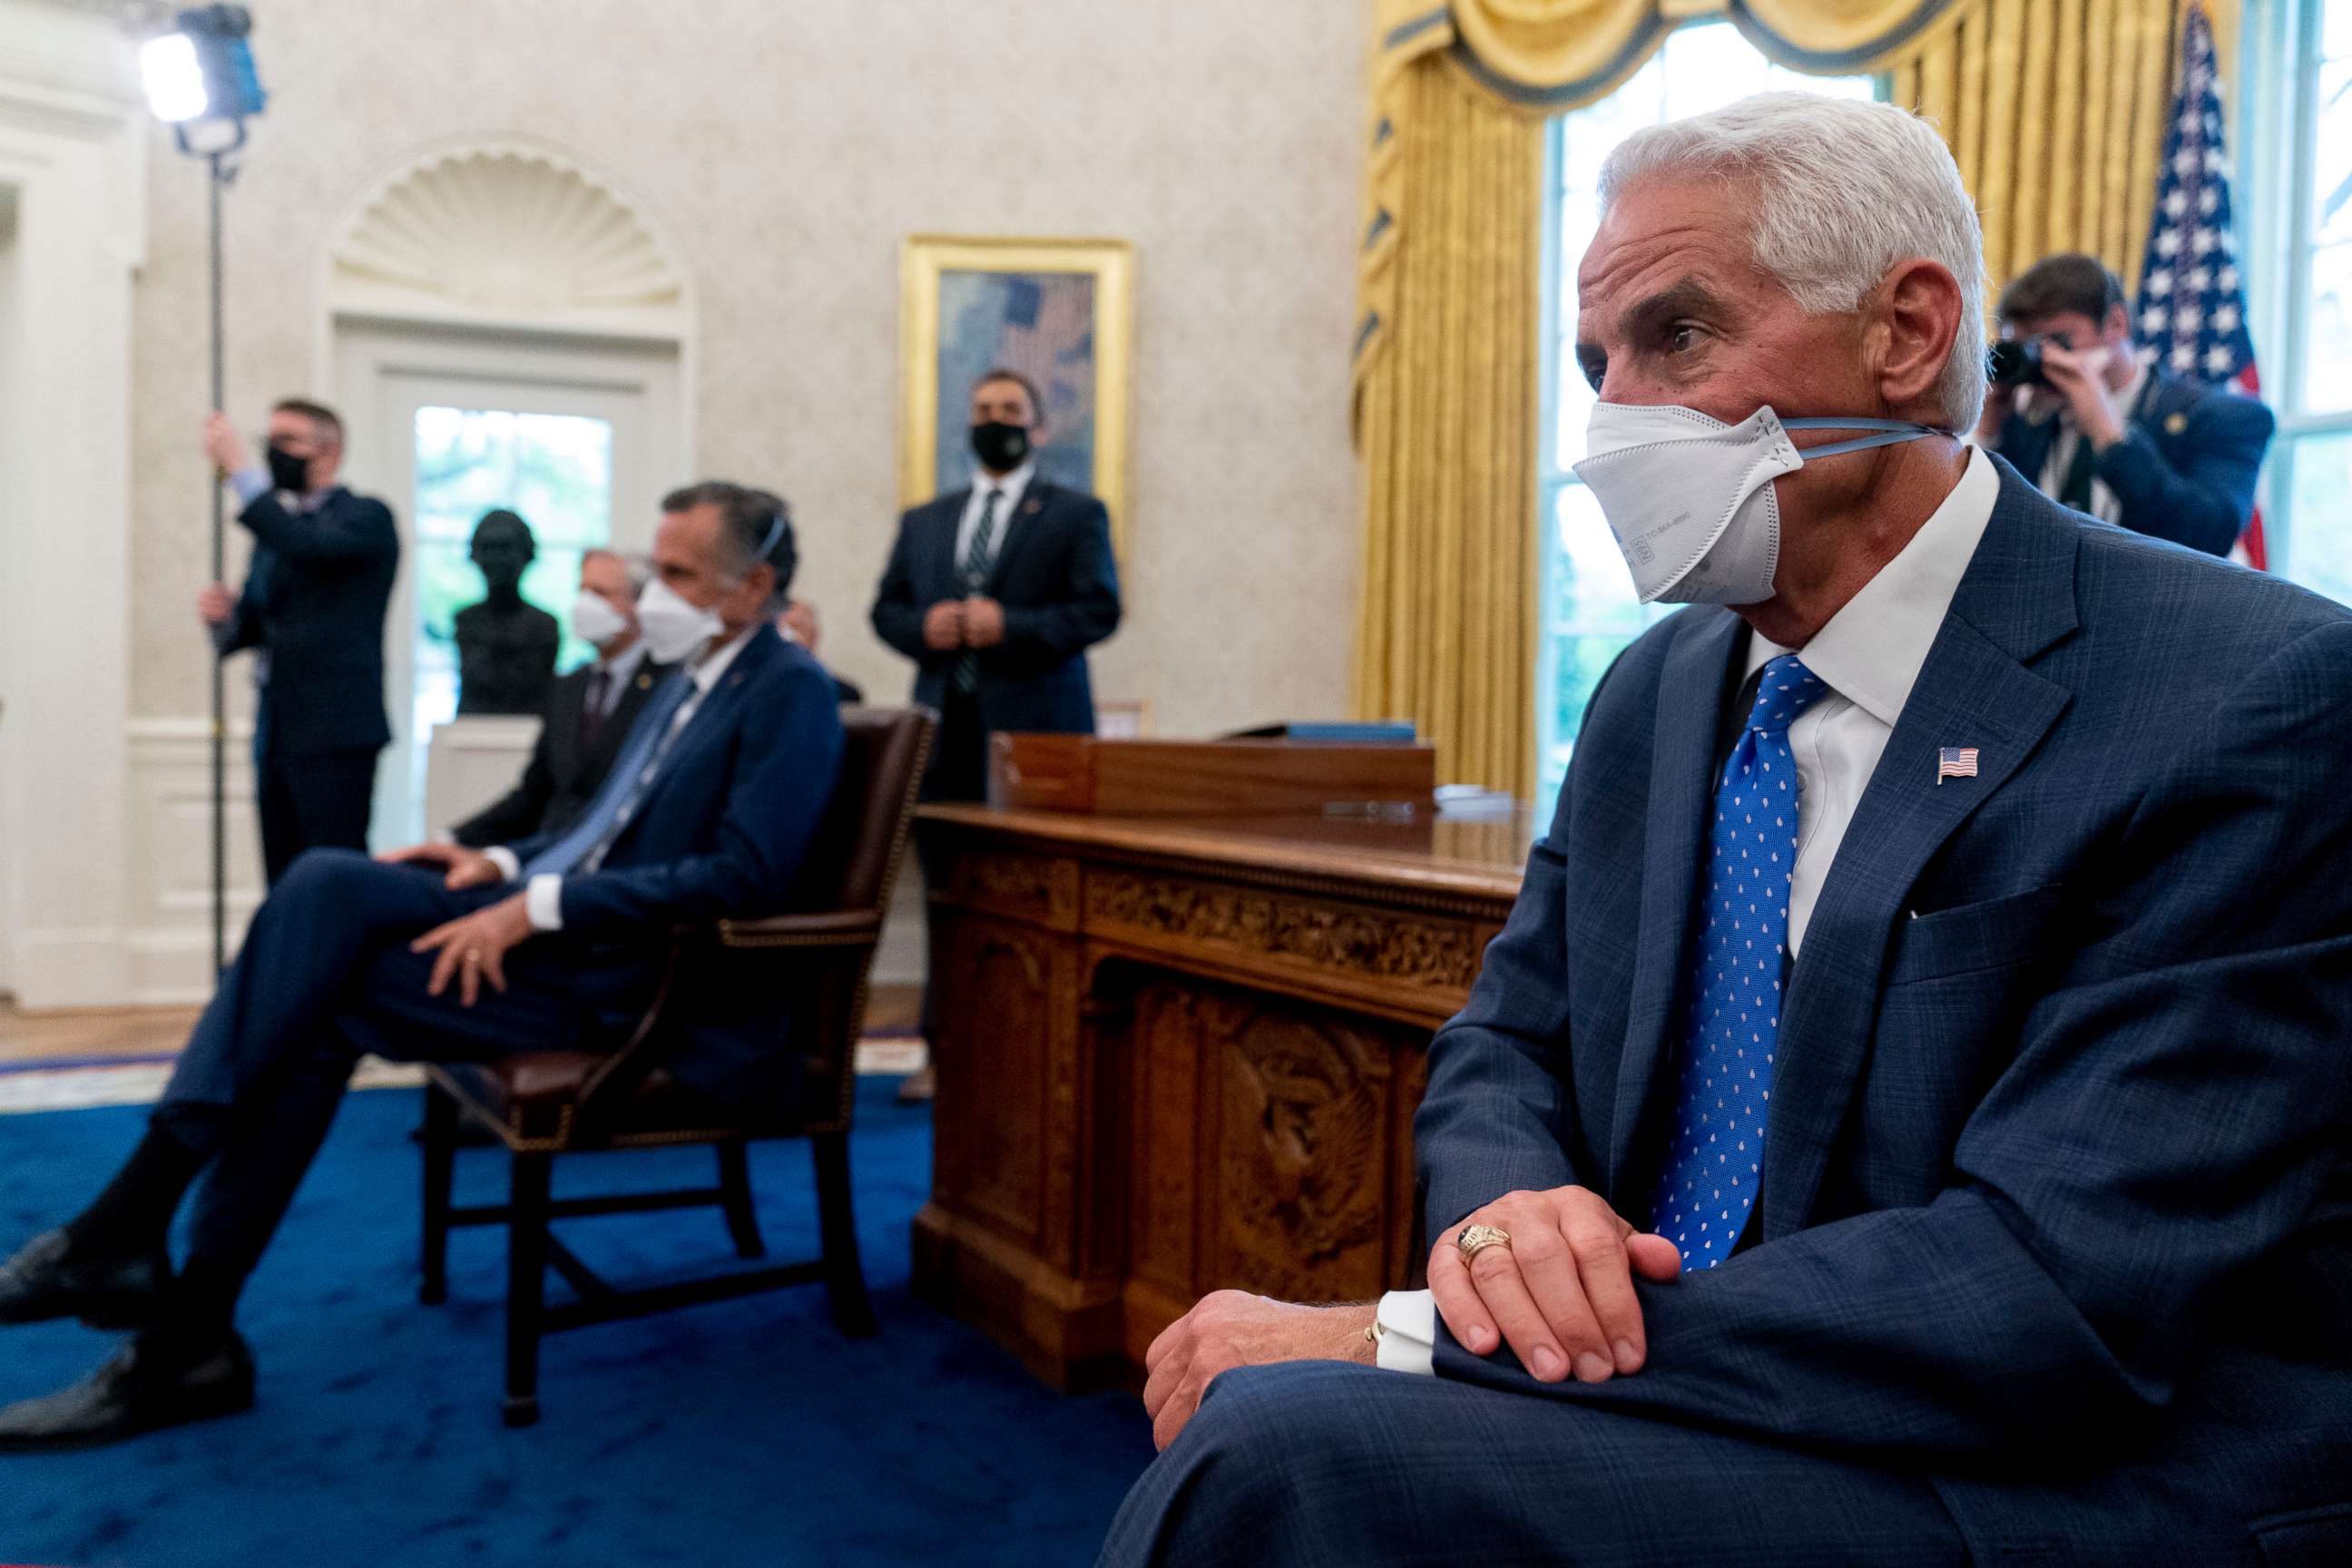 PHOTO: Rep. Charlie Crist attends a meeting with President Joe Biden and other members of congress to discuss his jobs plan in the Oval Office of the White House in Washington, April 19, 2021.